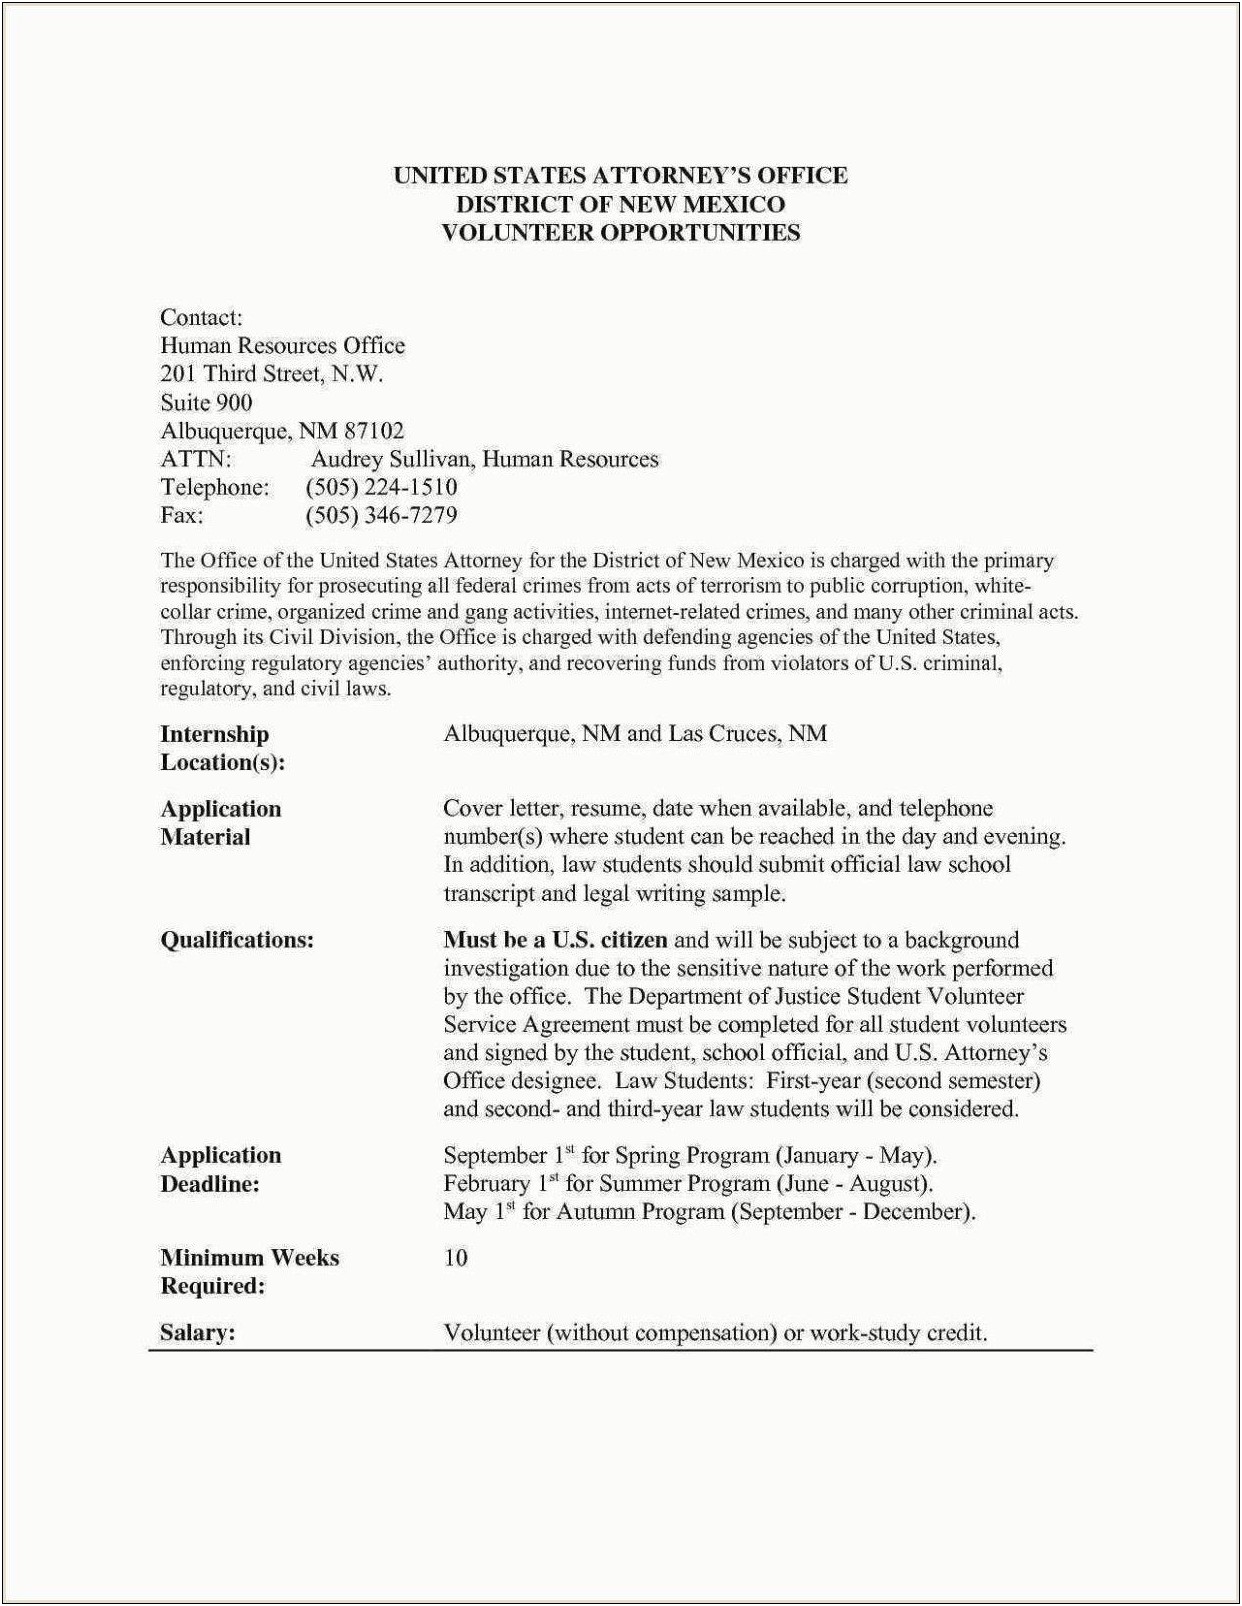 Entry Level Paramedic Resume Examples